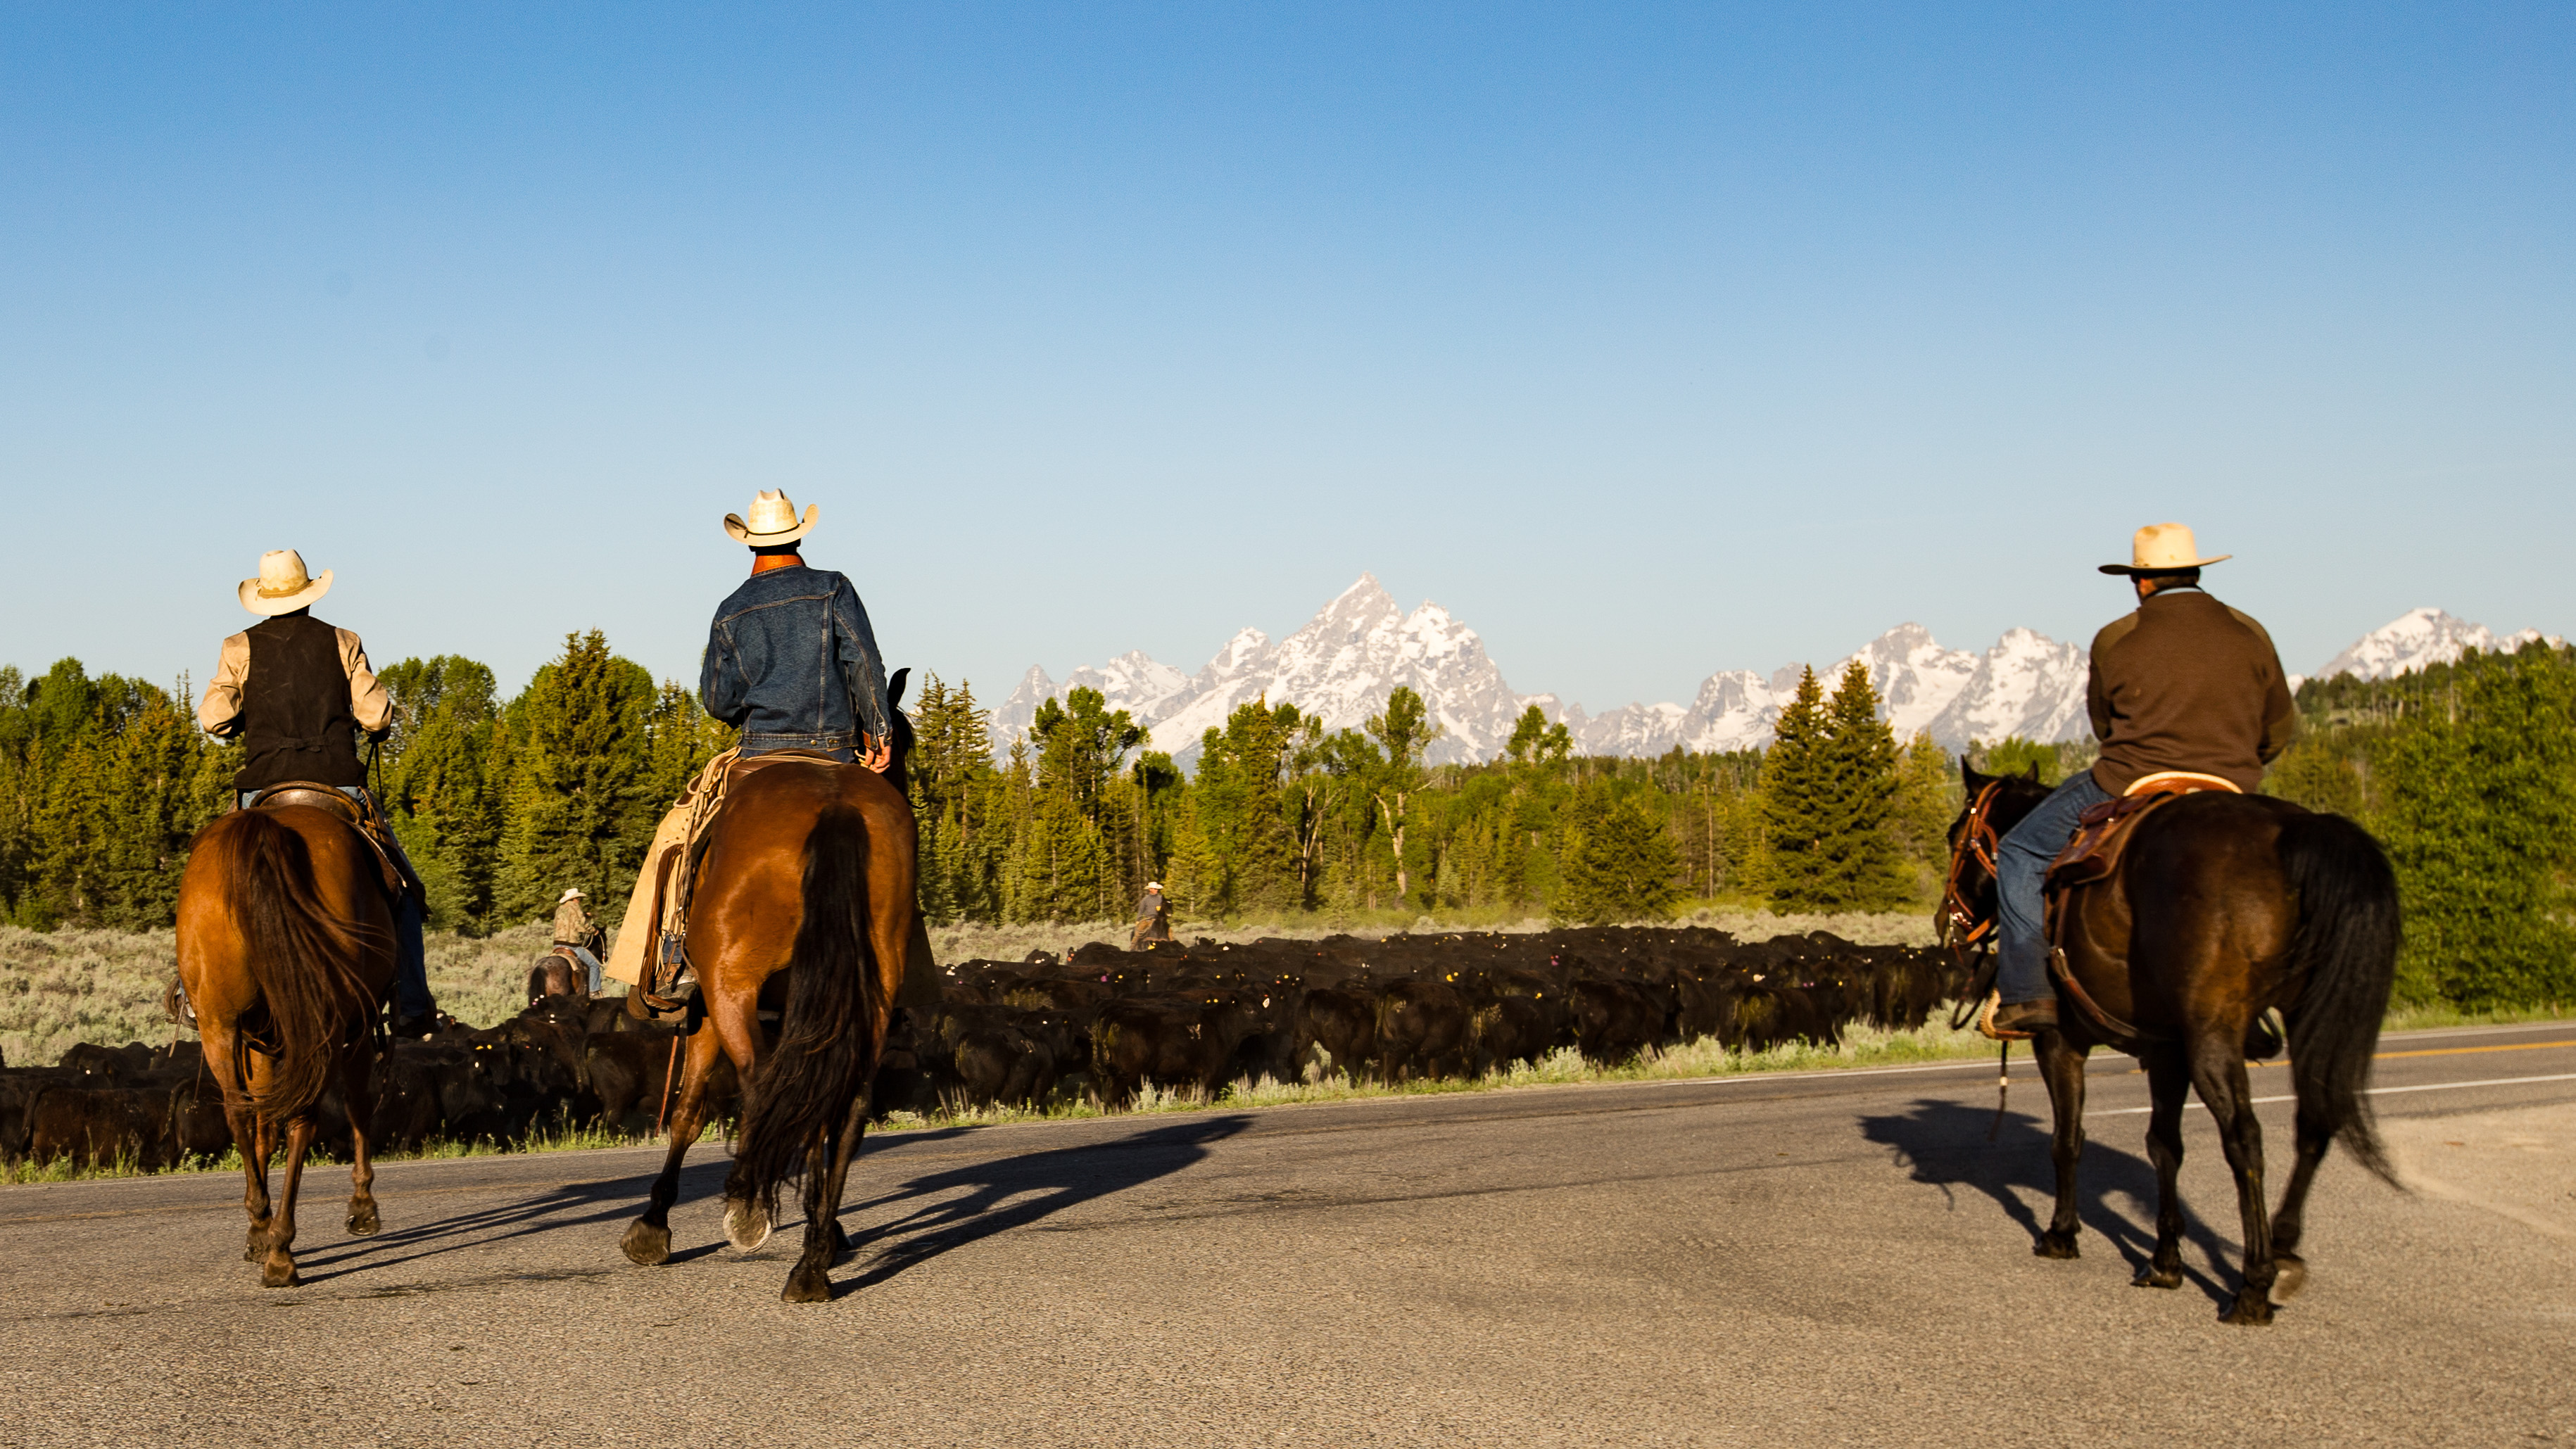 Cattle Drive takes place in Grand Teton